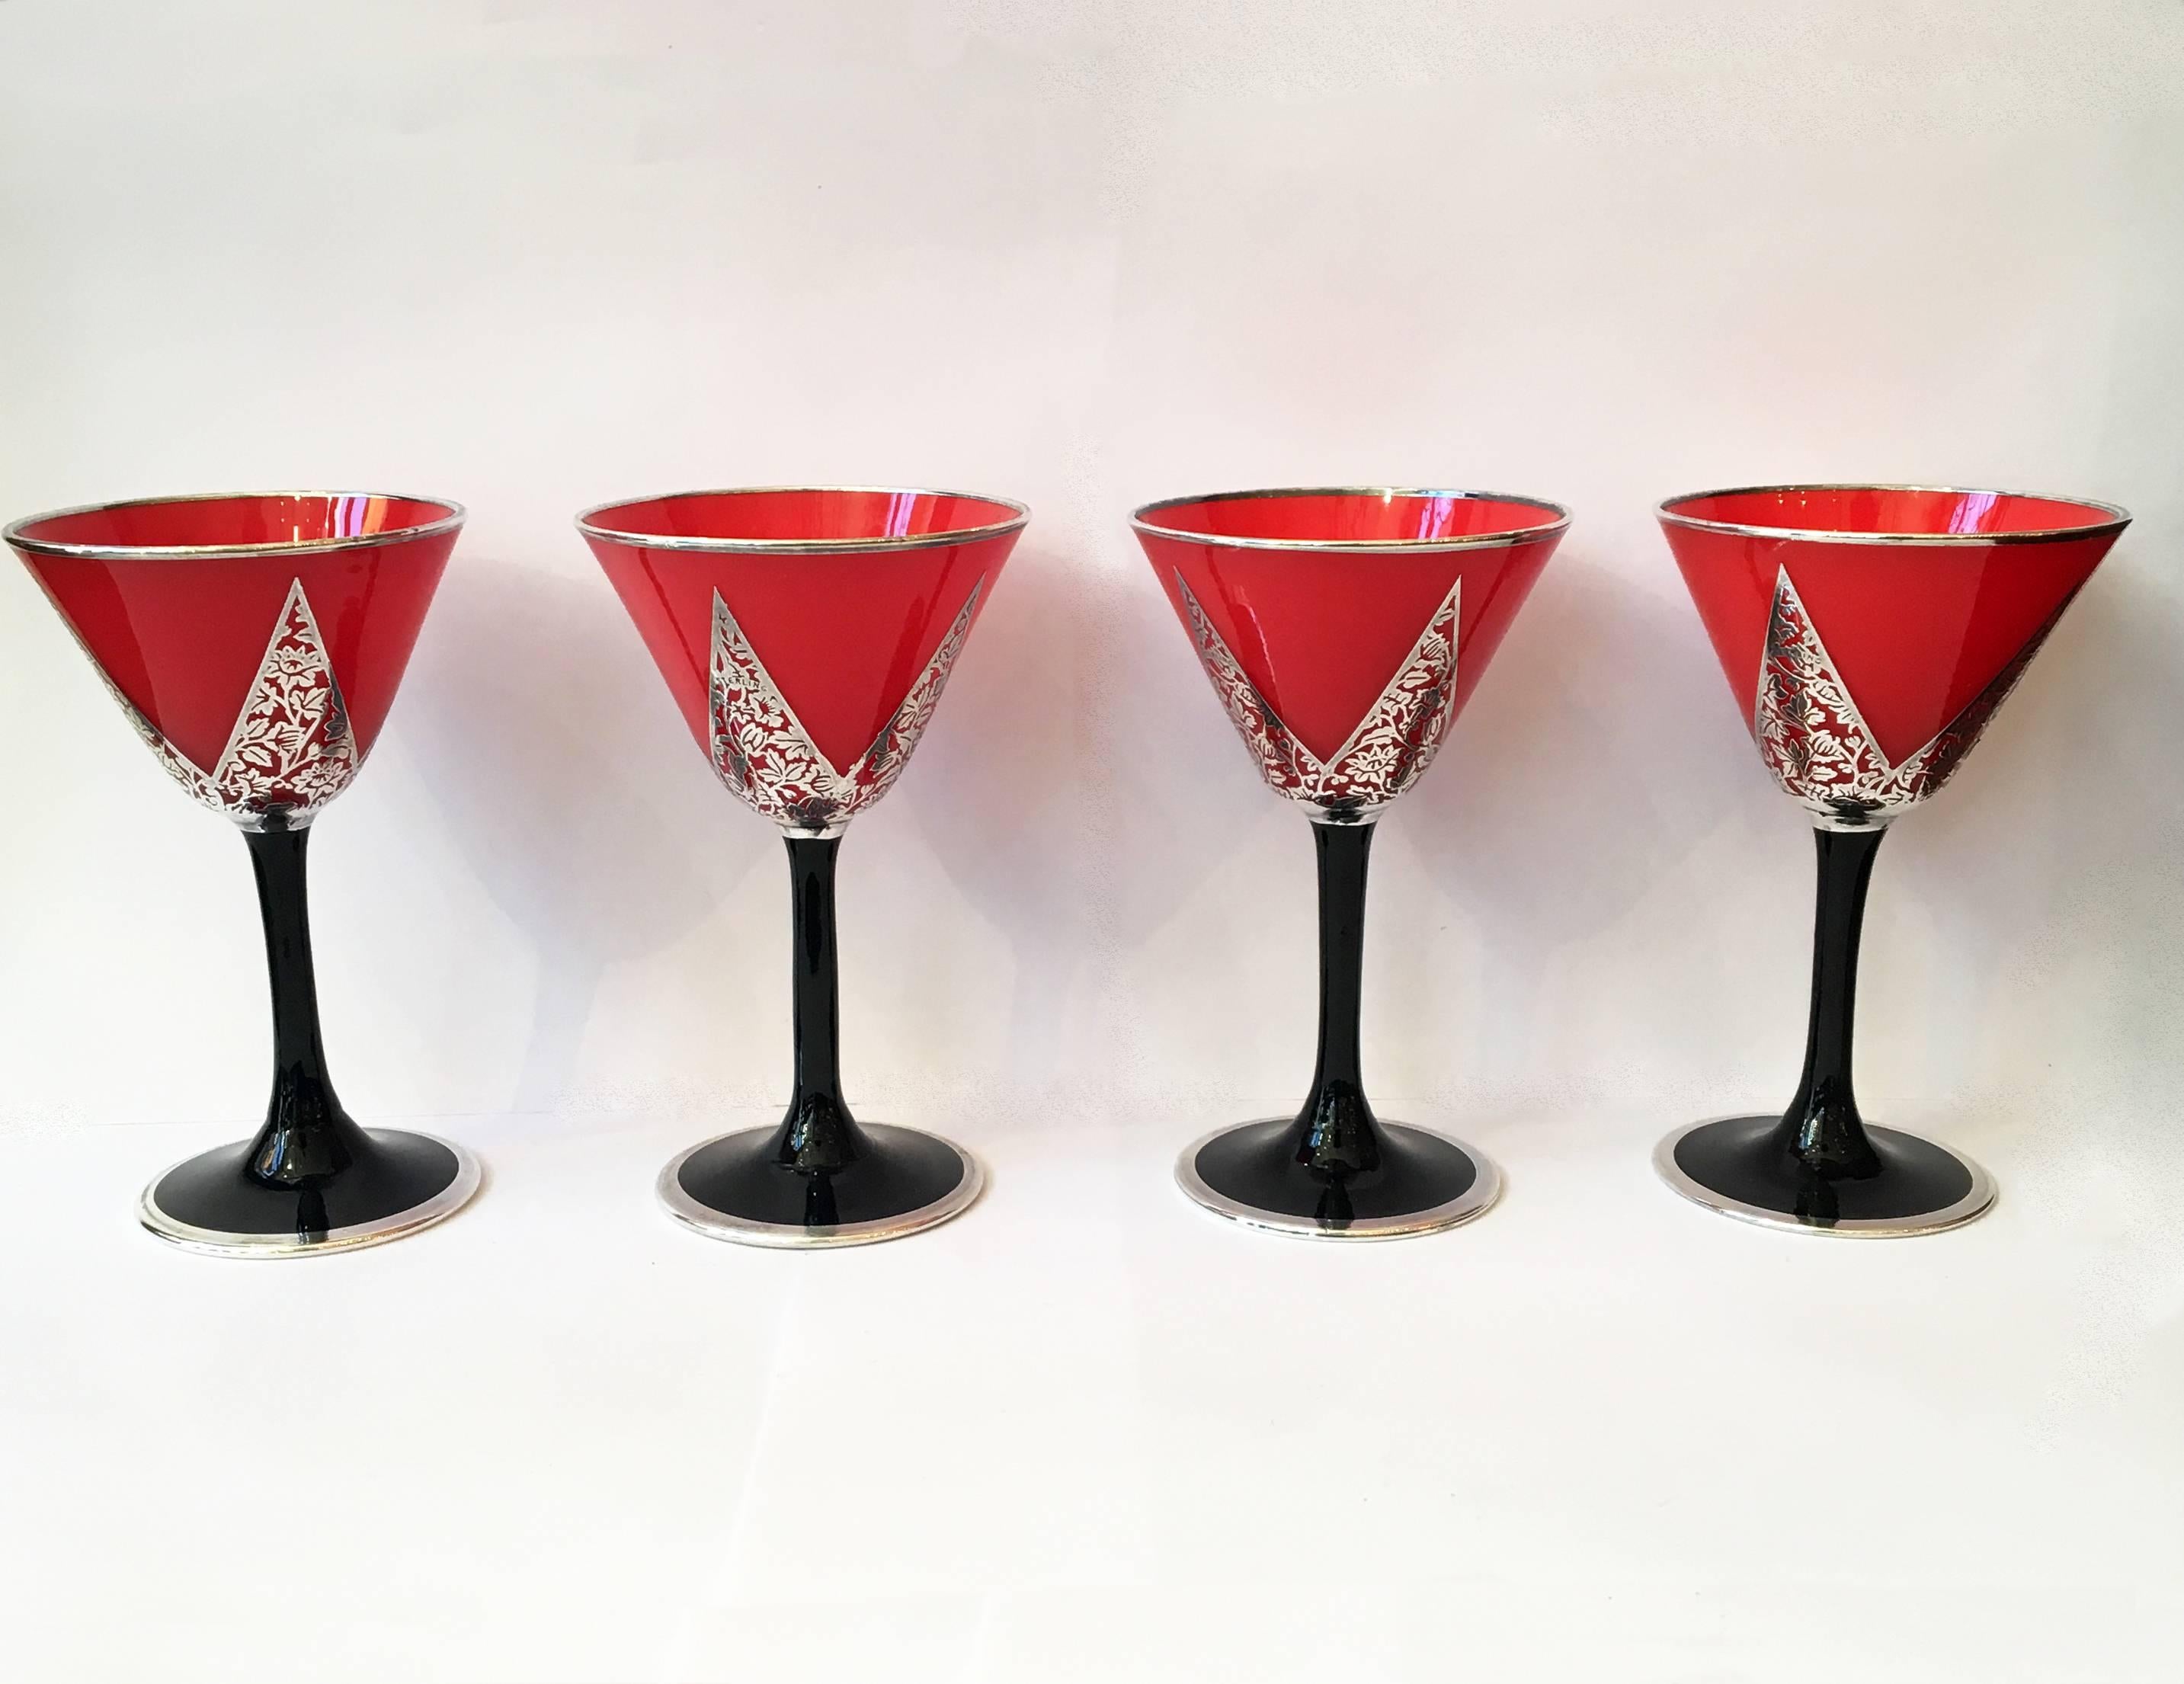 These early 20th century Art Deco cocktail glasses come in a set of four. The unique blood orange glass is decorated with beautiful sterling silver overlay. The stem of the glassware is black with silver lining the edge of the base.